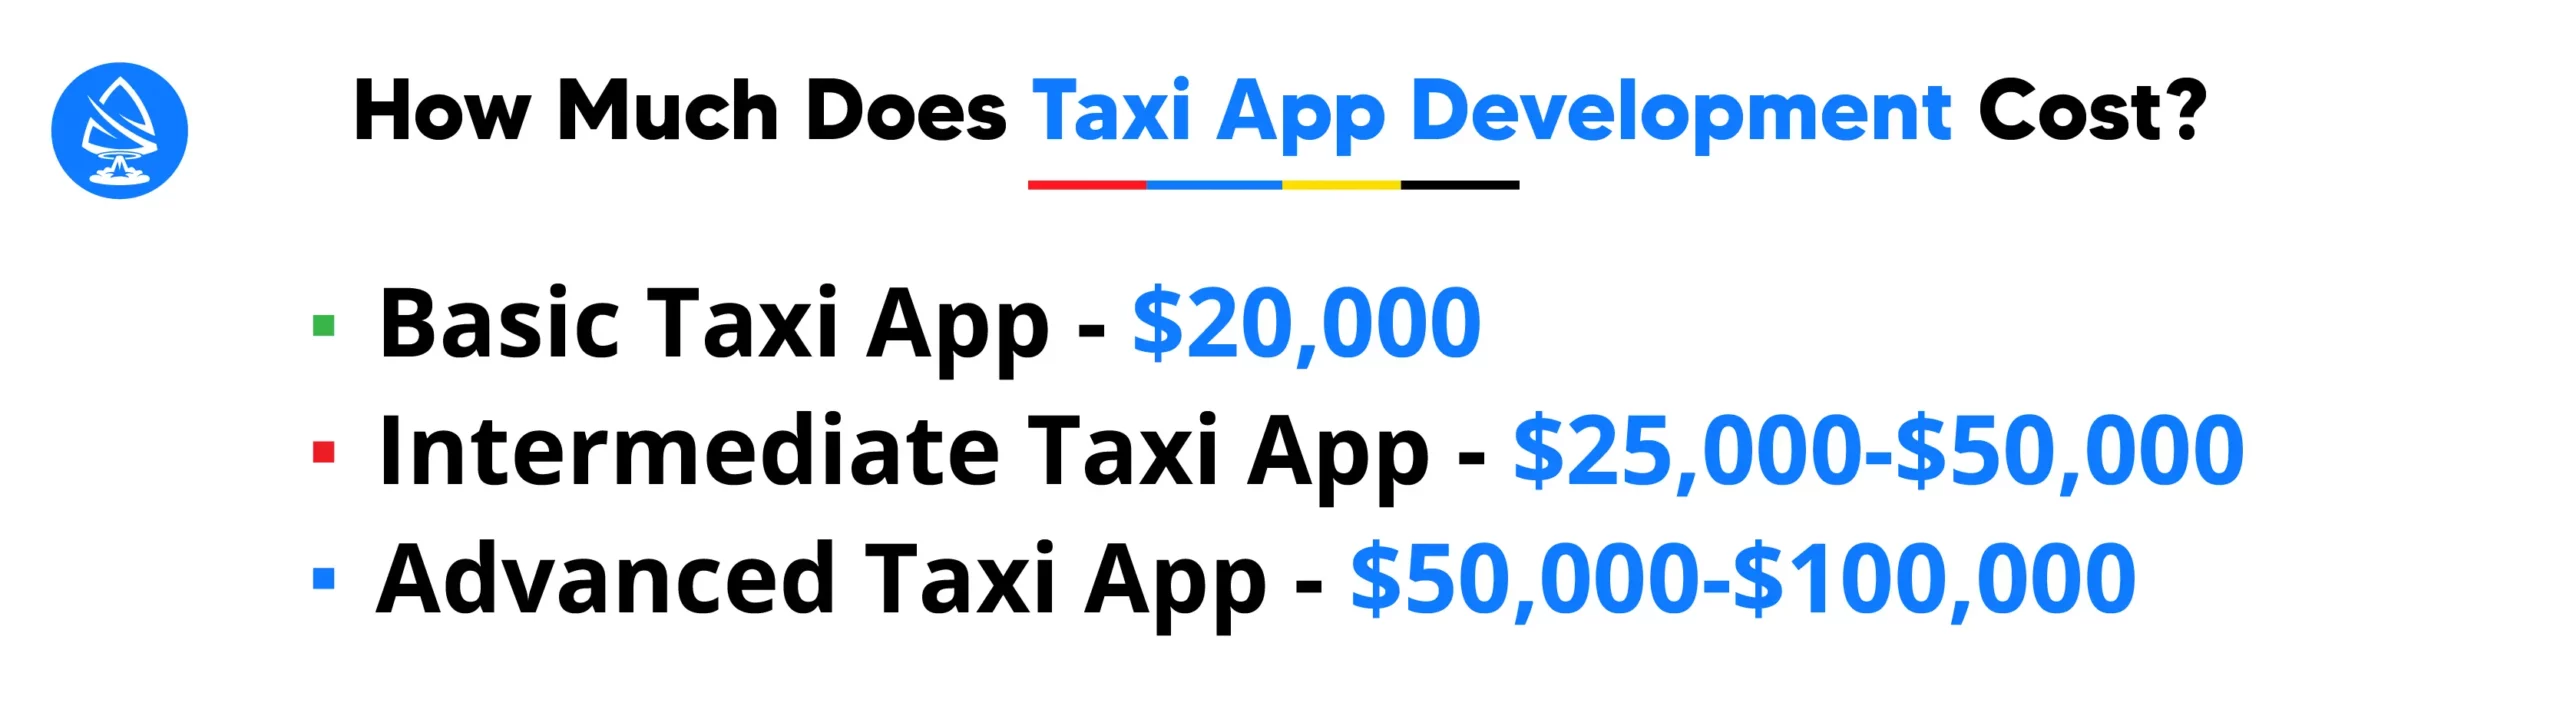 How Much Does Taxi App Development Cost?